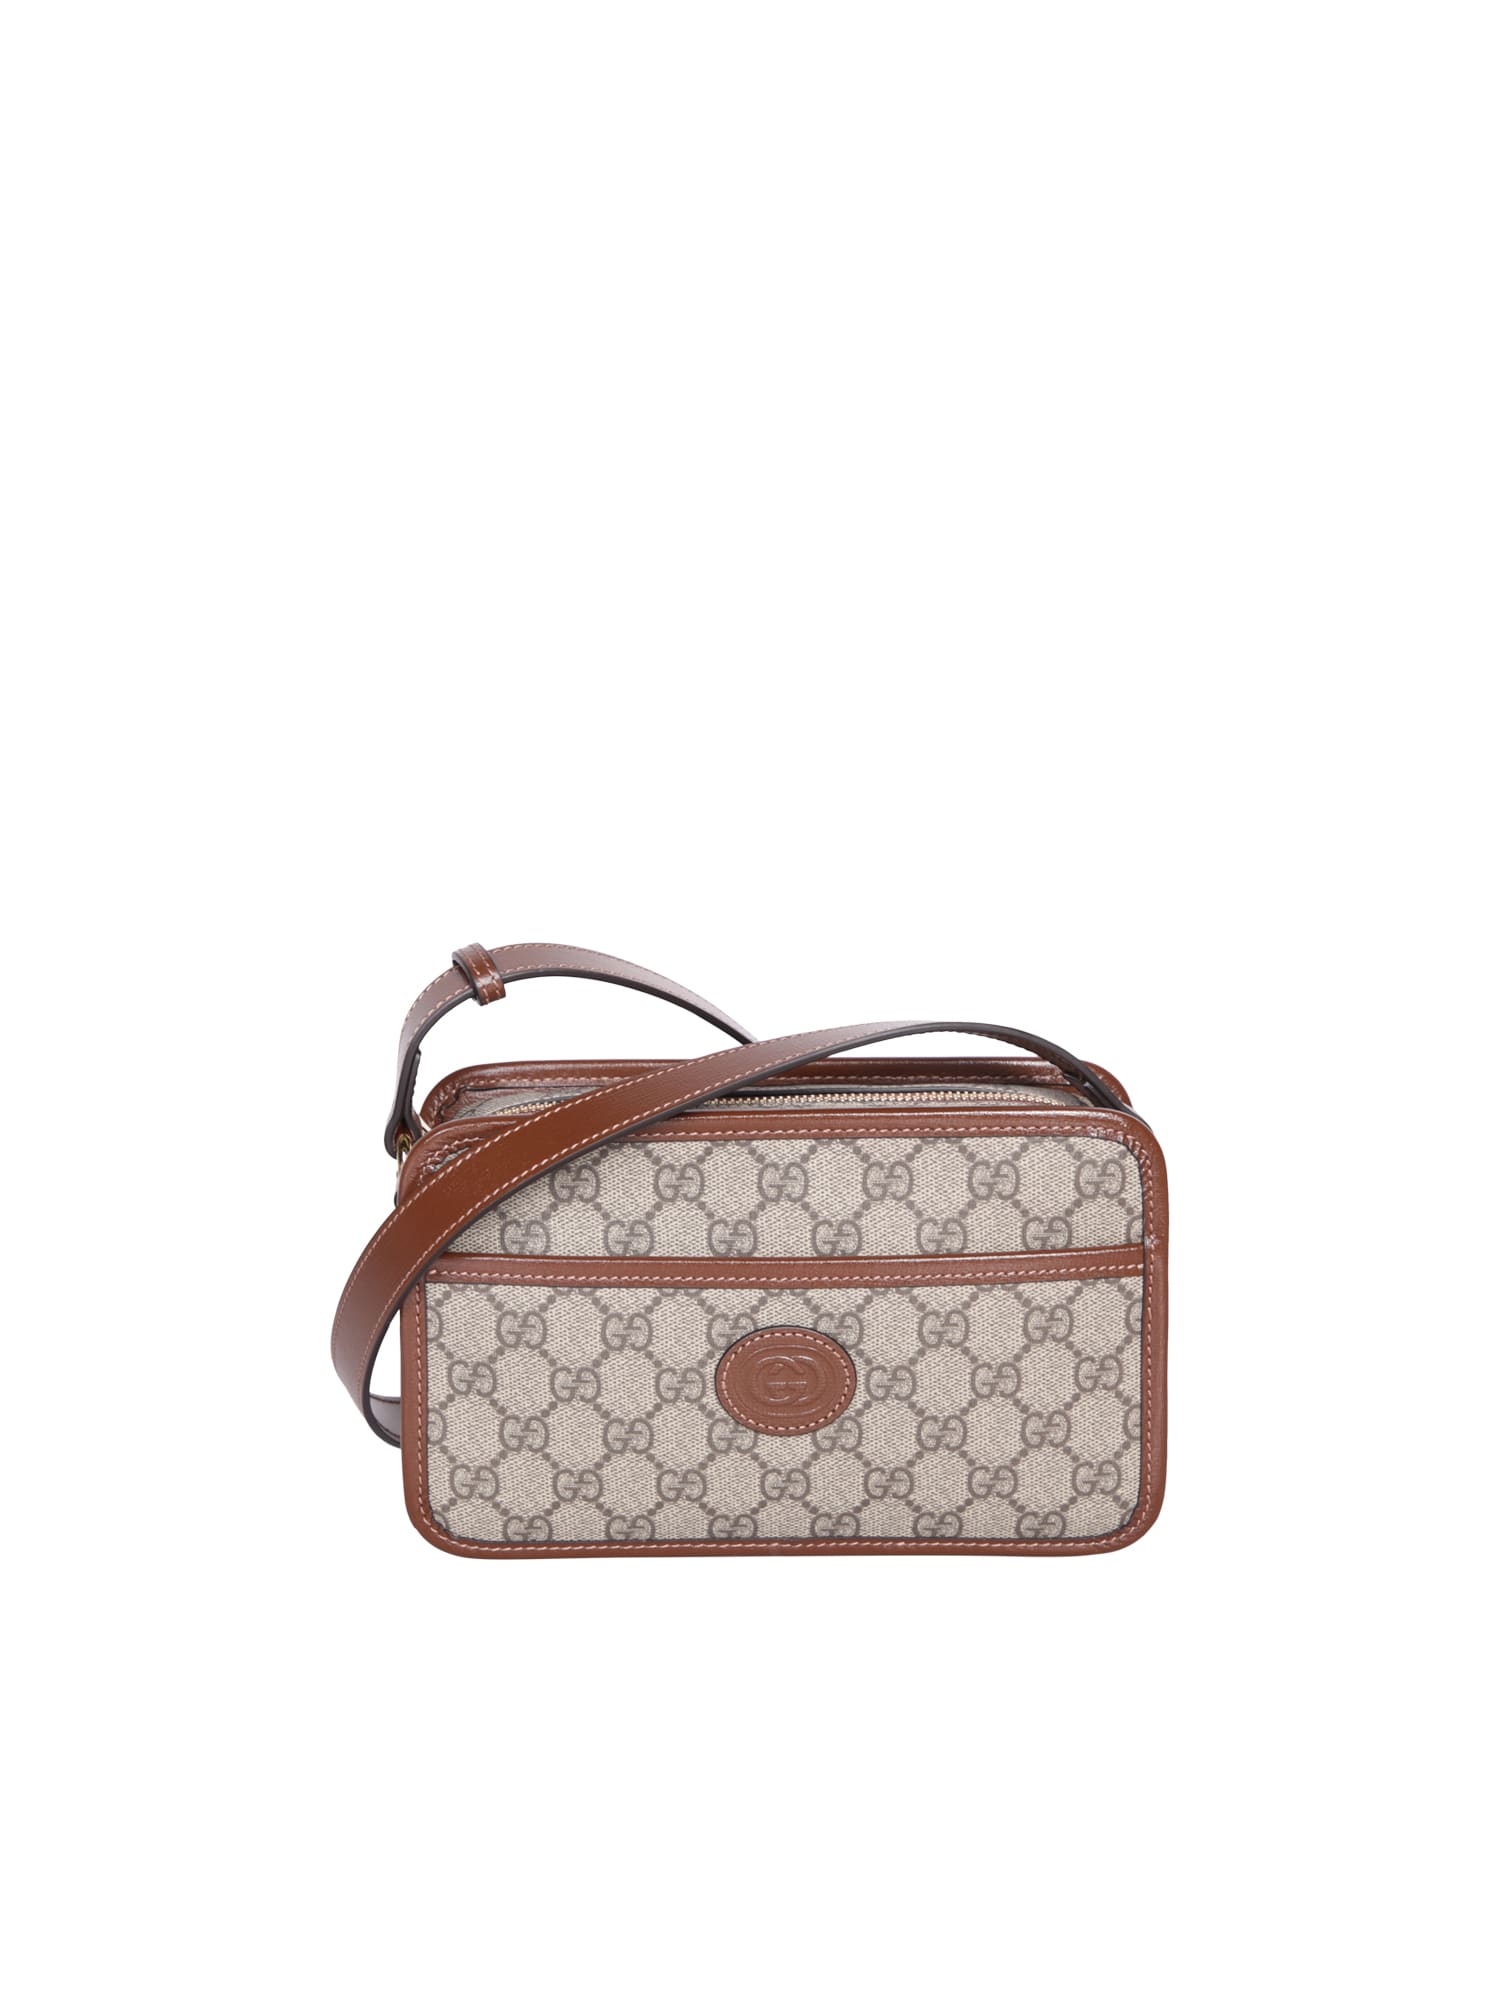 GUCCI Ophidia Mini Shoulder Bag With Gg Motif